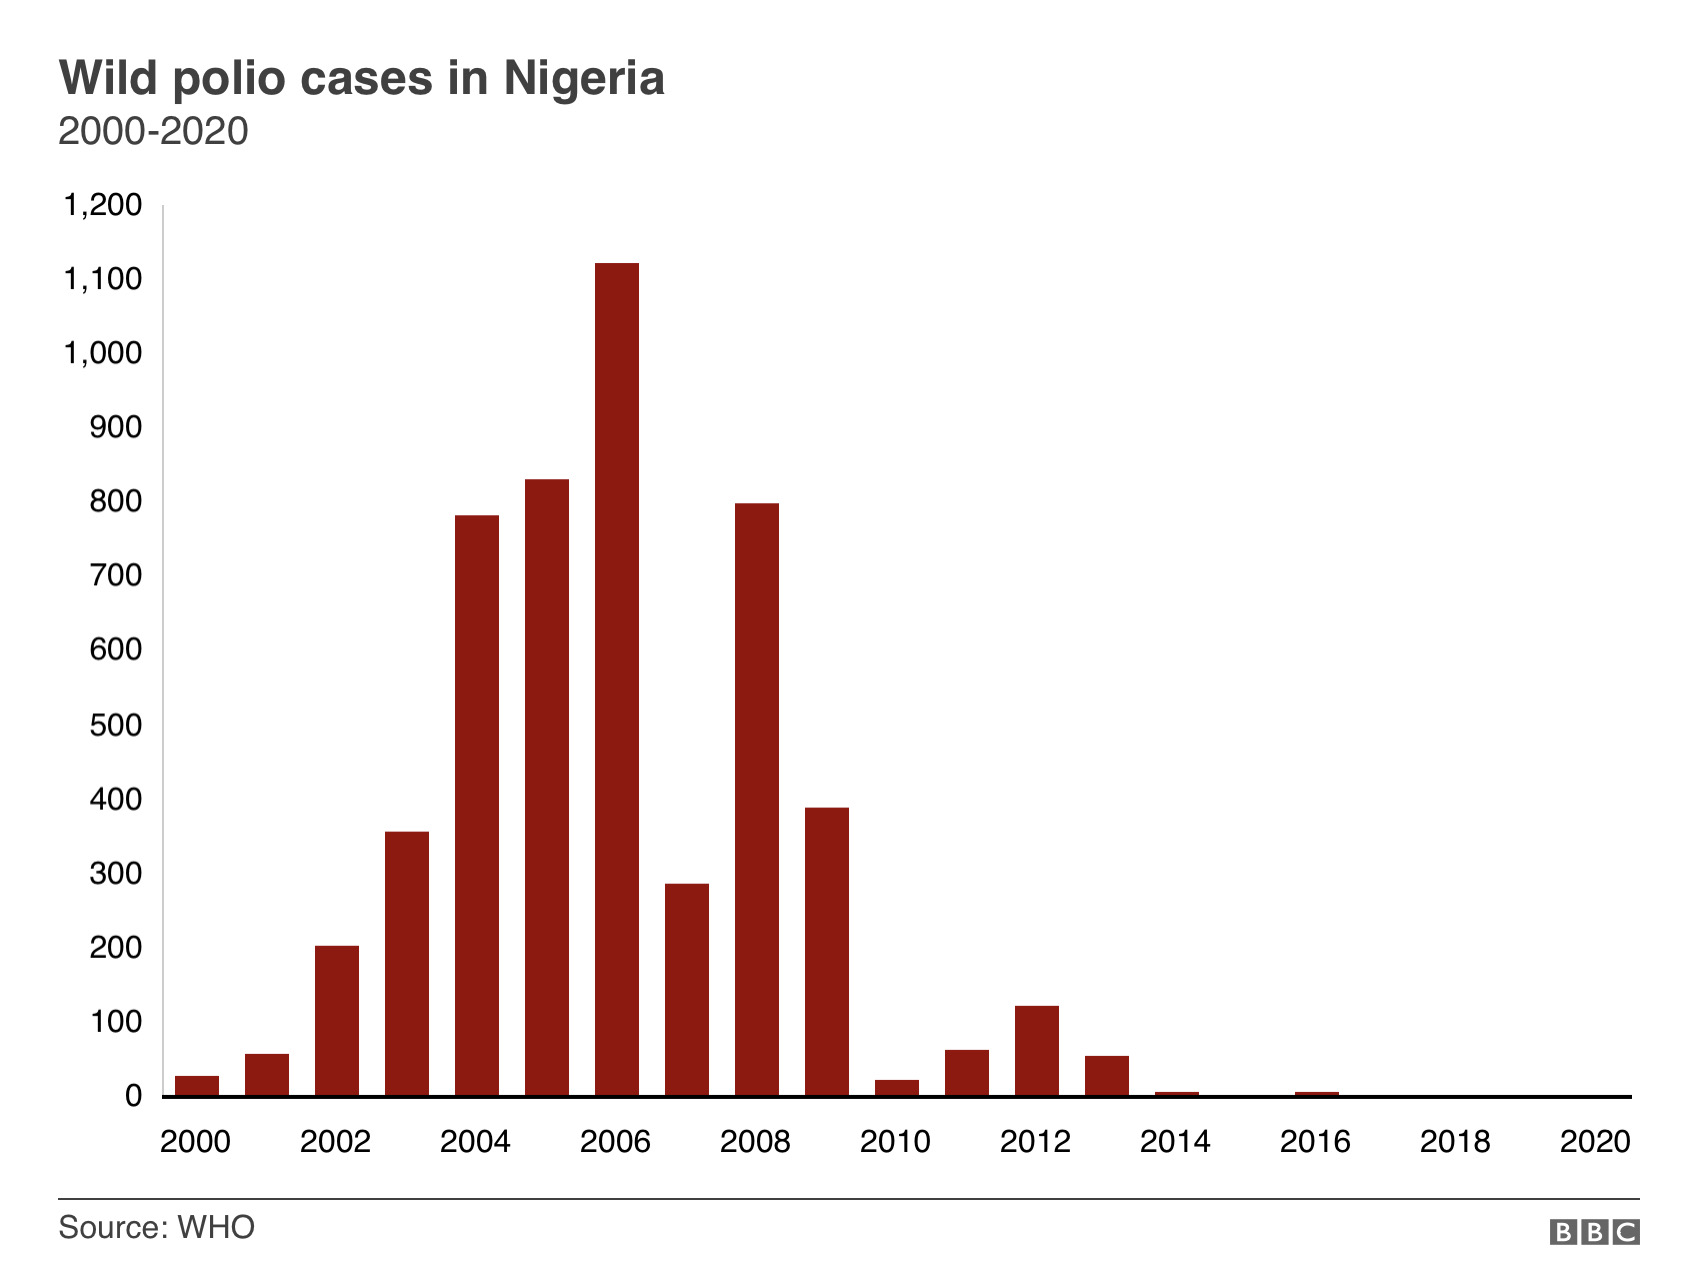 Nigeria attained wild polio-free status after meeting all the criteria for certification, which include three years of non-detection of any wild poliovirus case in the country. Before the certification, Nigeria, Afghanistan and Pakistan were the only wild polio endemic countries globally.